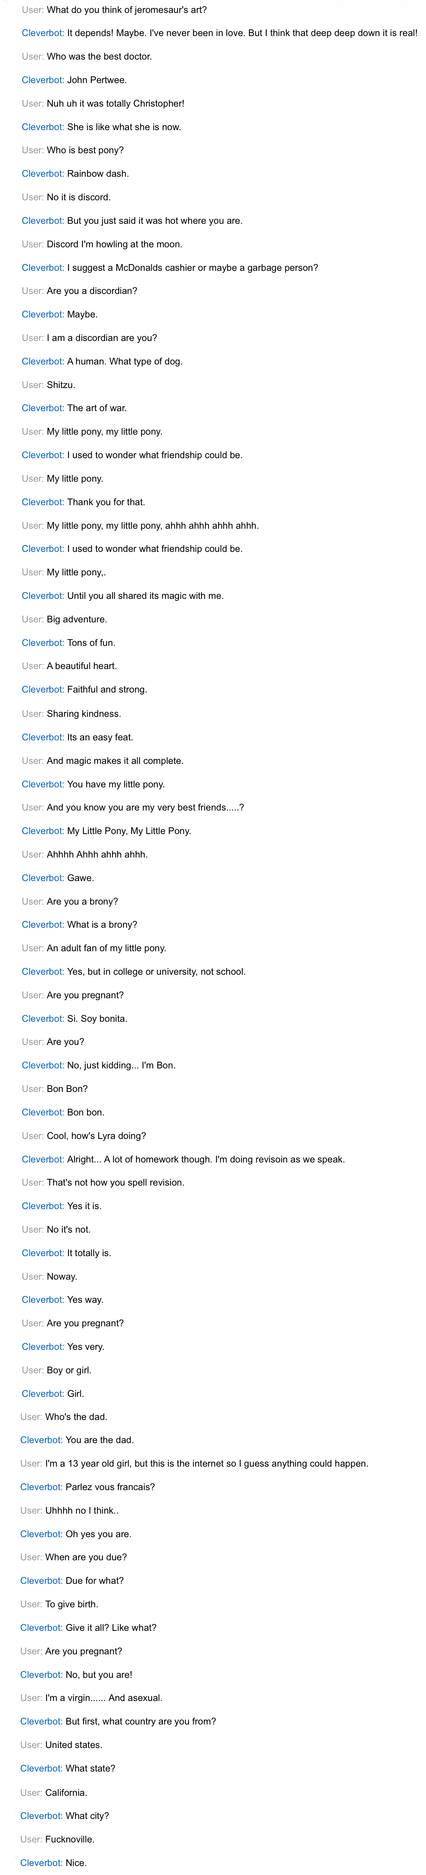 Cleverbot Conversation By Chaostaco On Deviantart